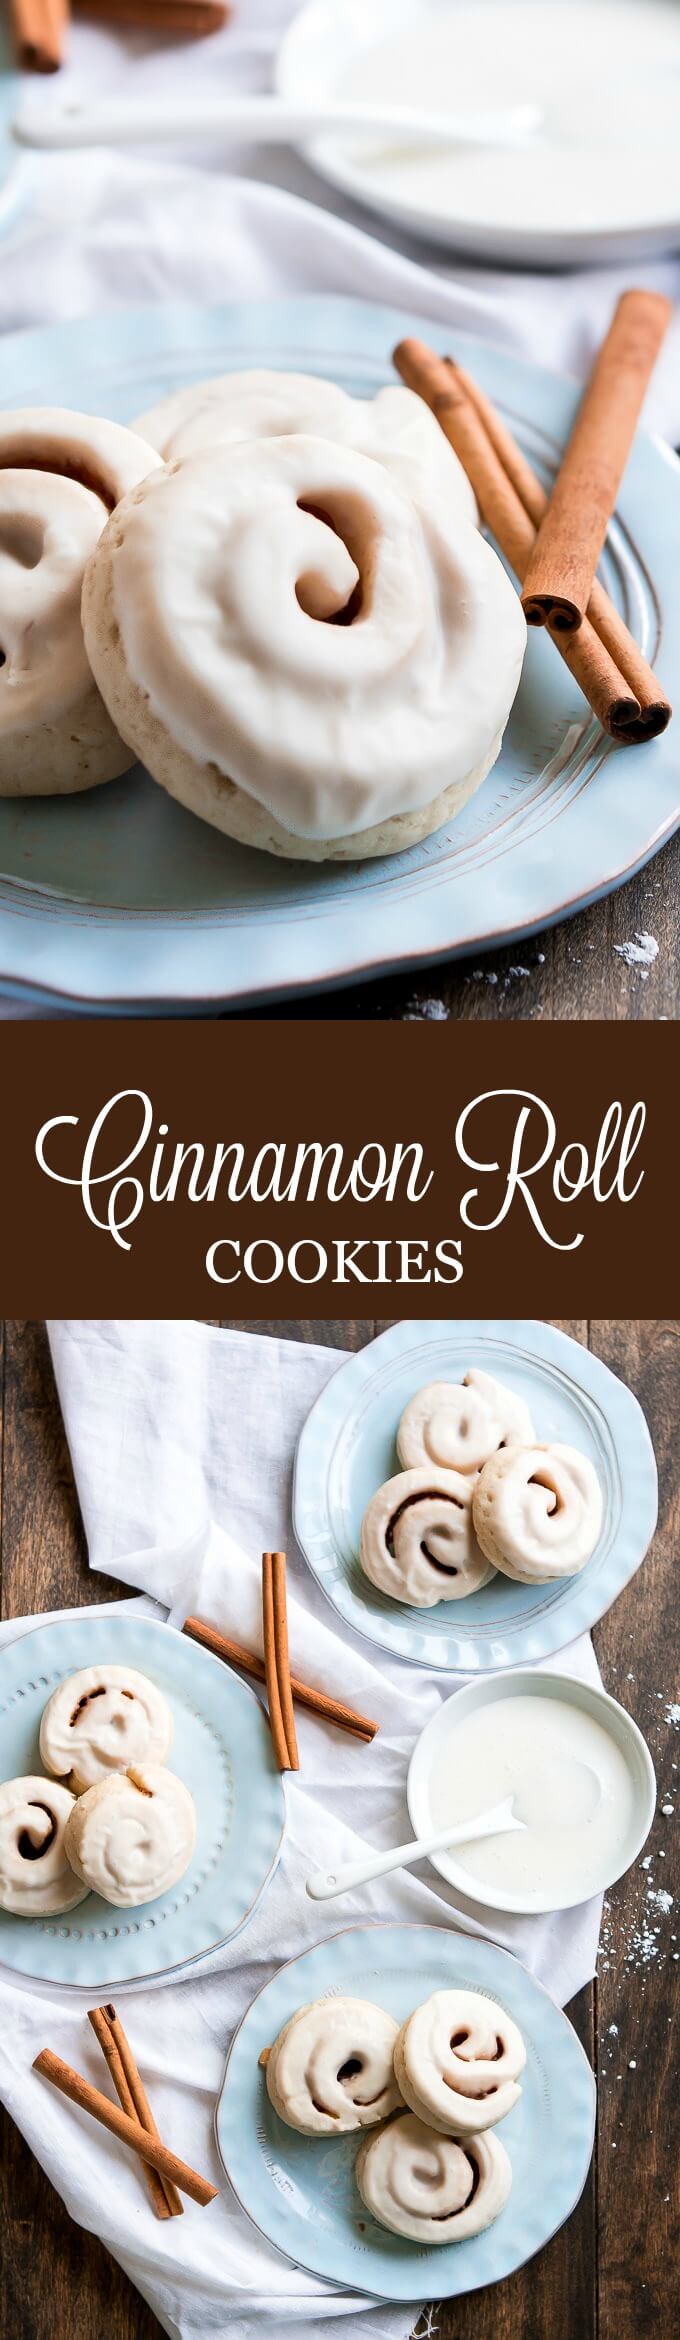 Enjoy your favorite breakfast for dessert with these Cinnamon Roll Cookies made with a soft sugar cookie, cinnamon and sugar rolled up inside, and glazed.